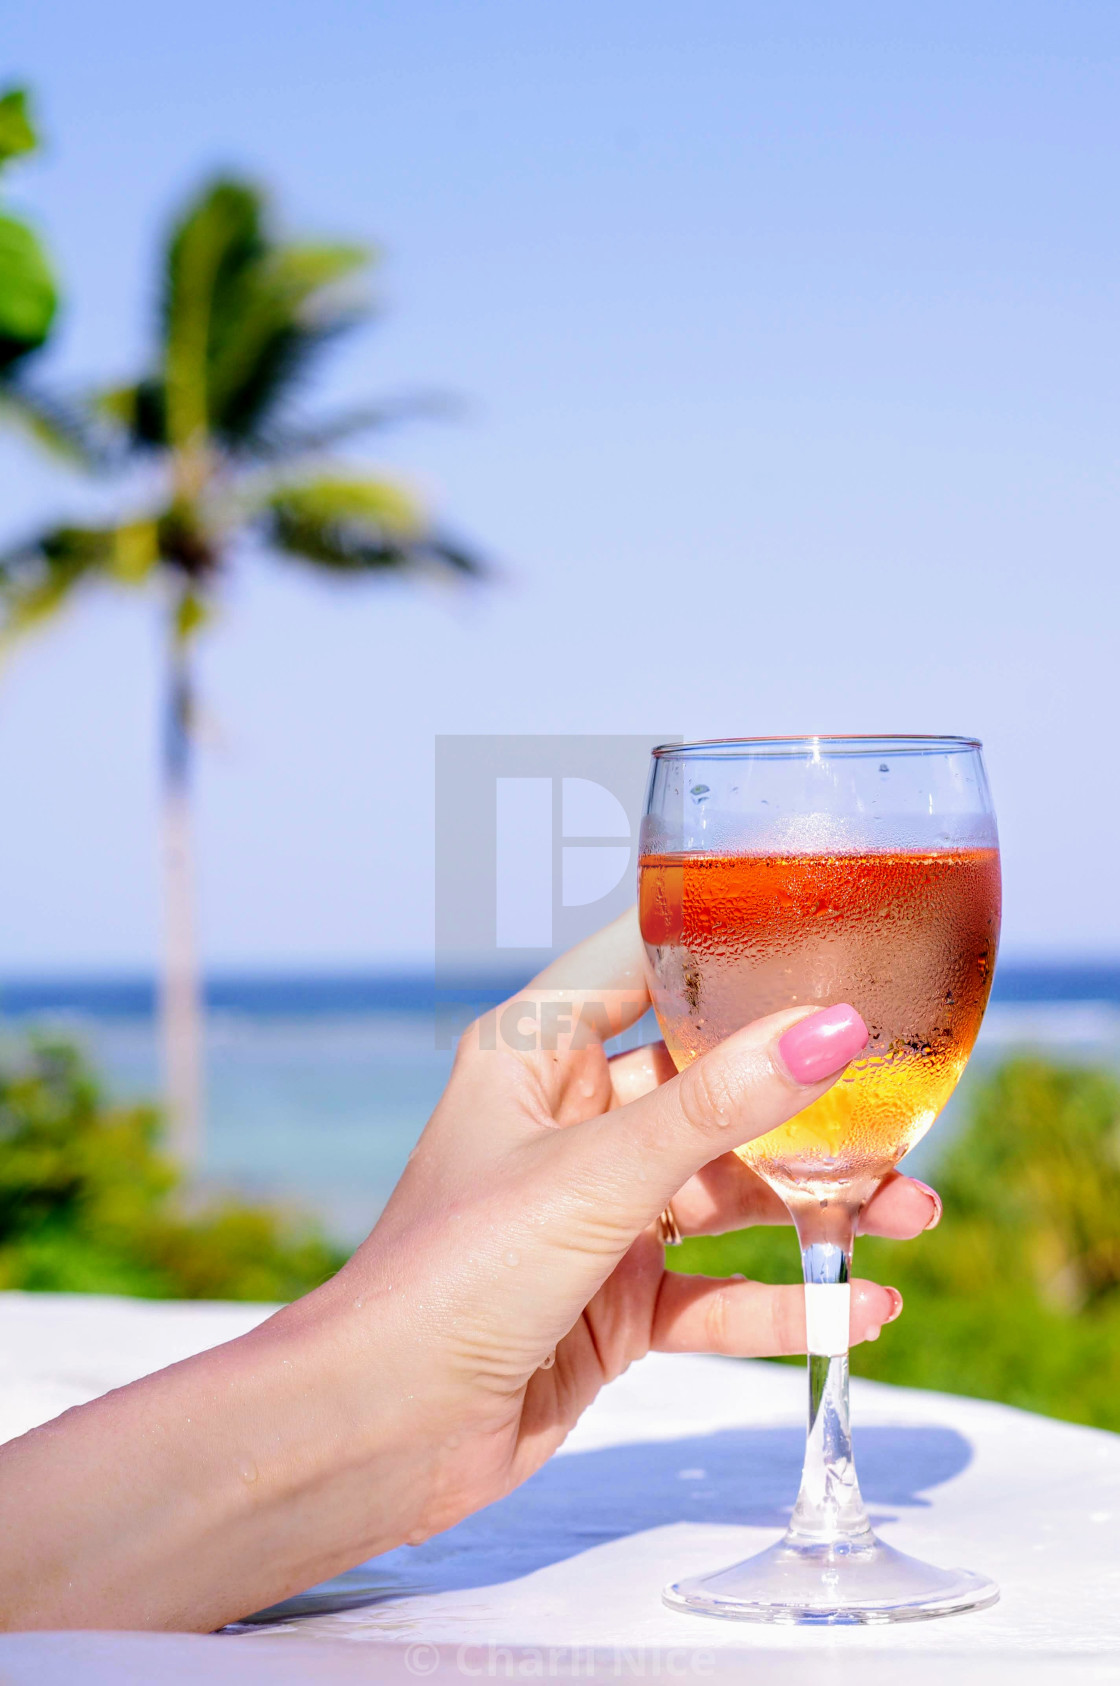 "Rose All Day" stock image